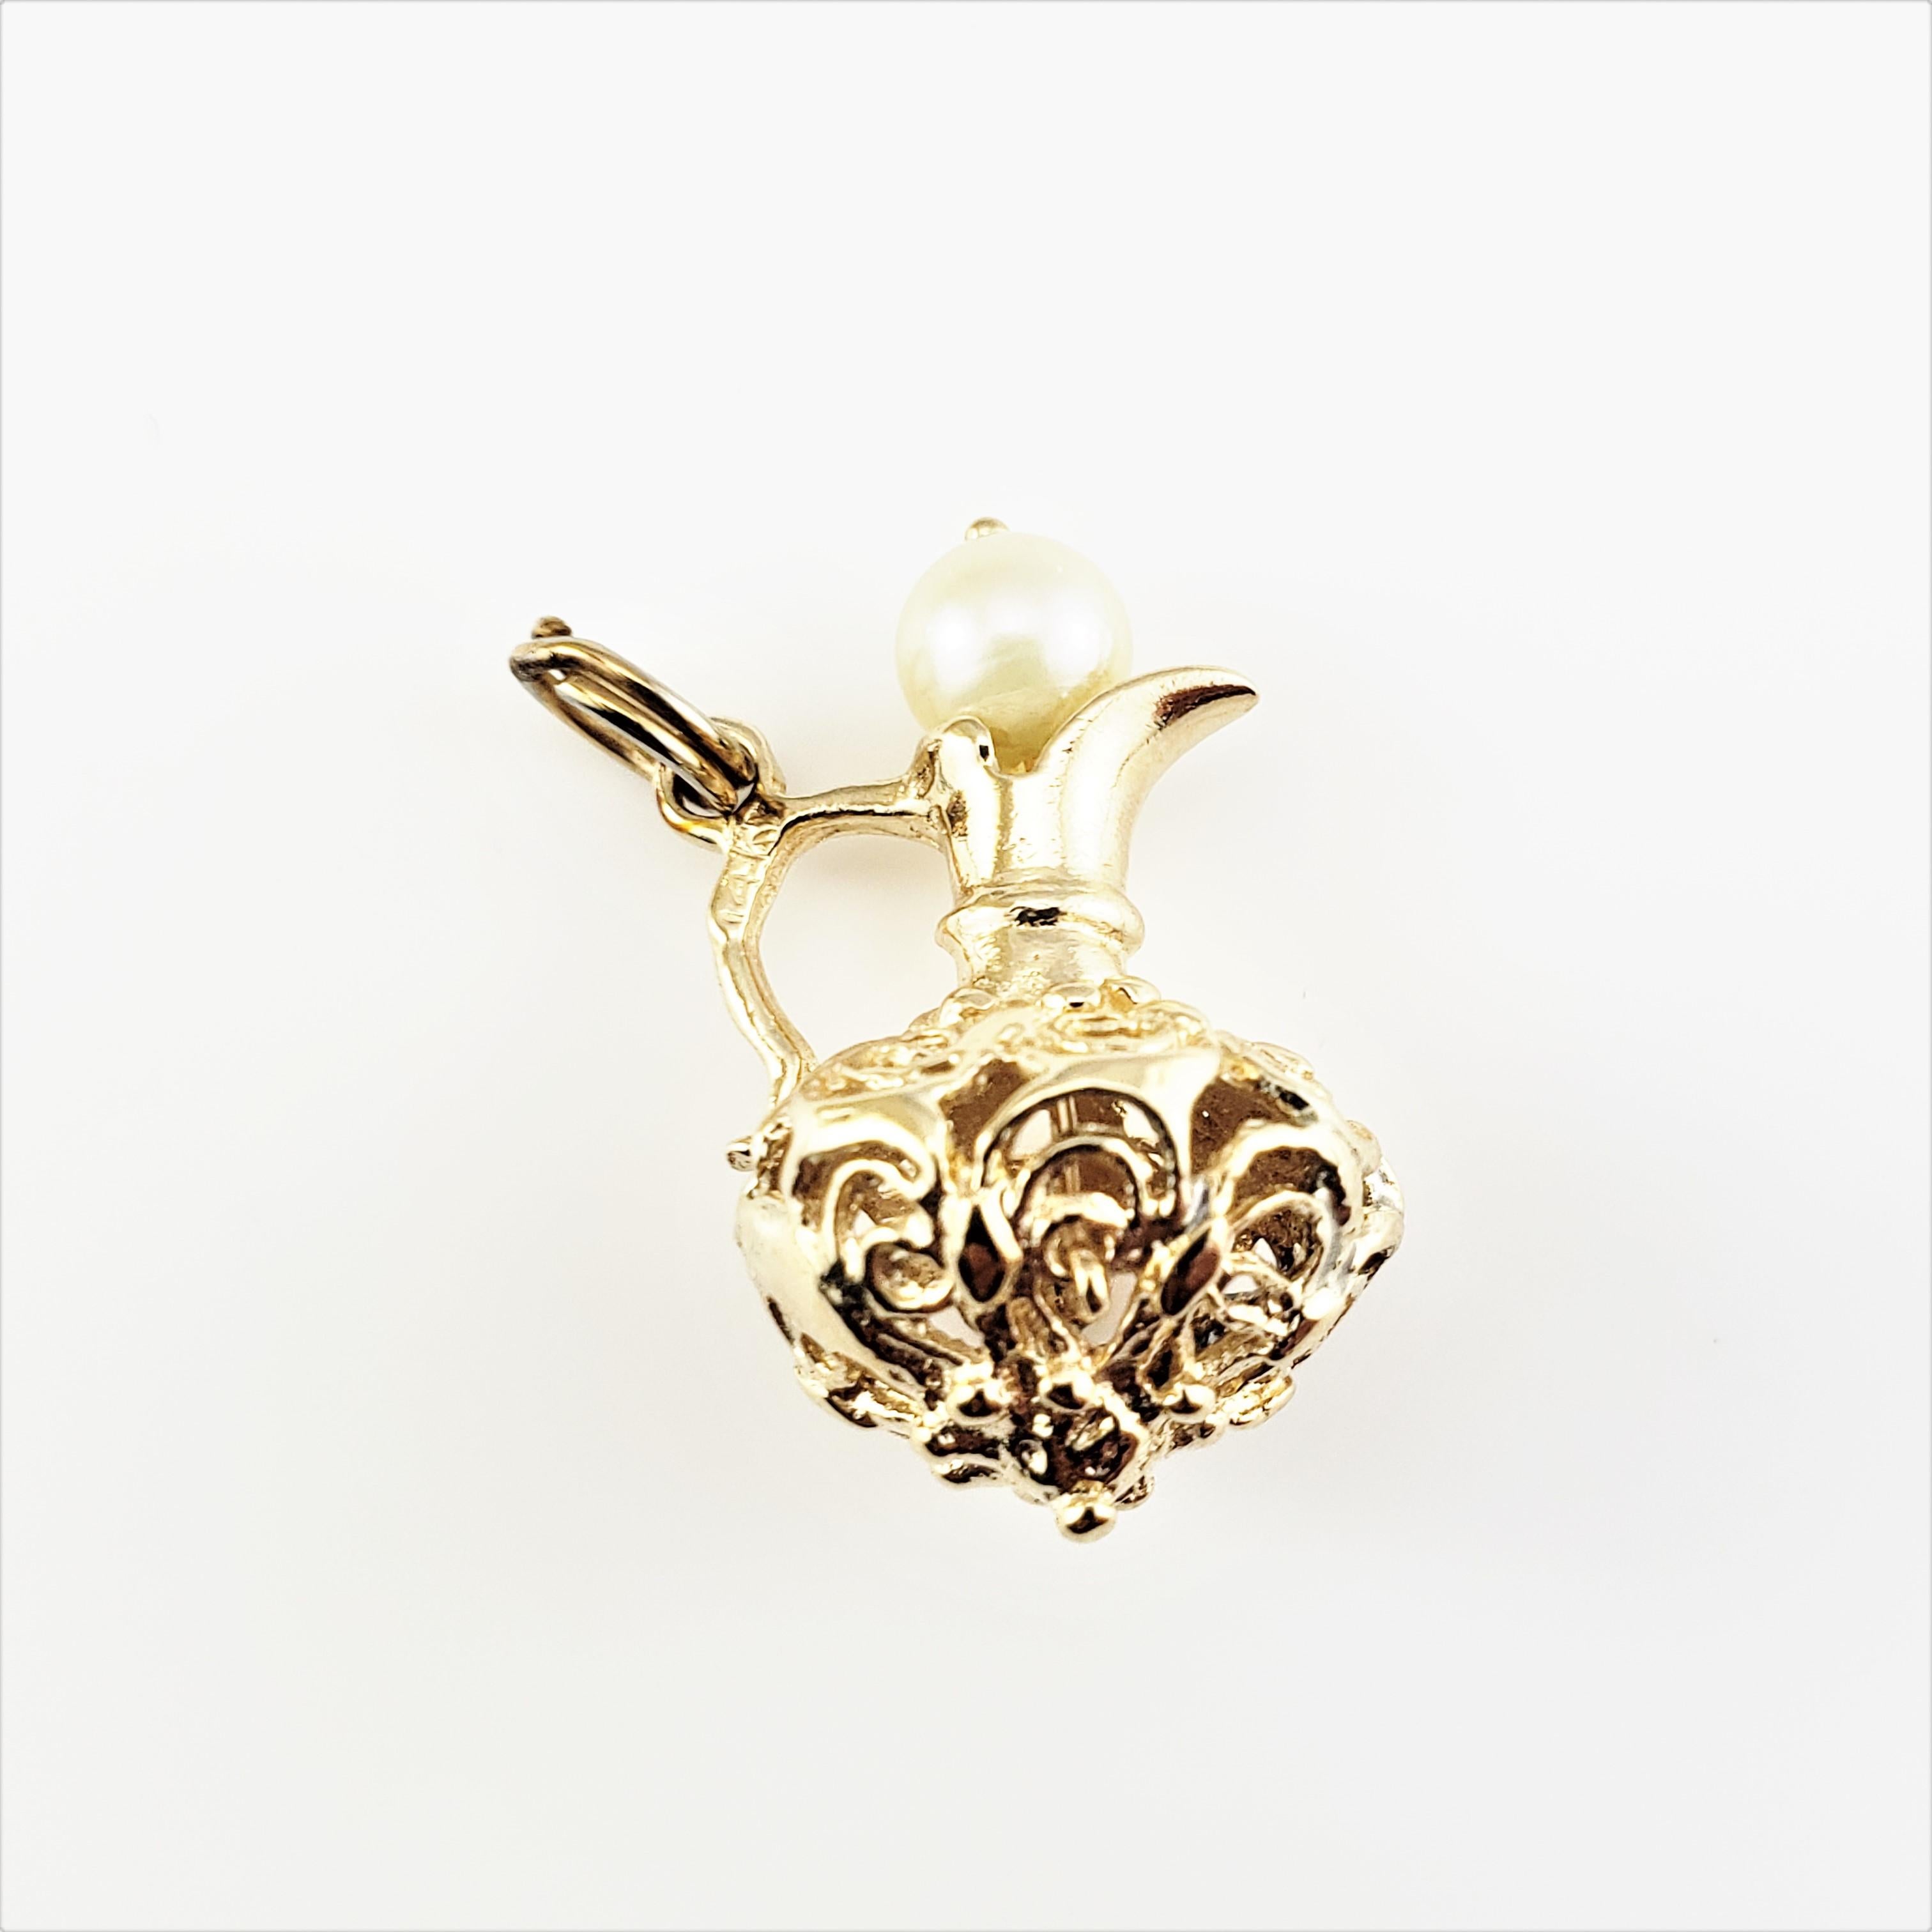 14 Karat Yellow Gold and Pearl Pitcher Charm-

This 3D charm features a beautifully detailed pitcher accented with one round pearl (5 mm).  Crafted in classic 14K yellow gold.

*Chain not included

Size:  23 mm x  13 mm

Weight:  2.3 dwt. /  3.6